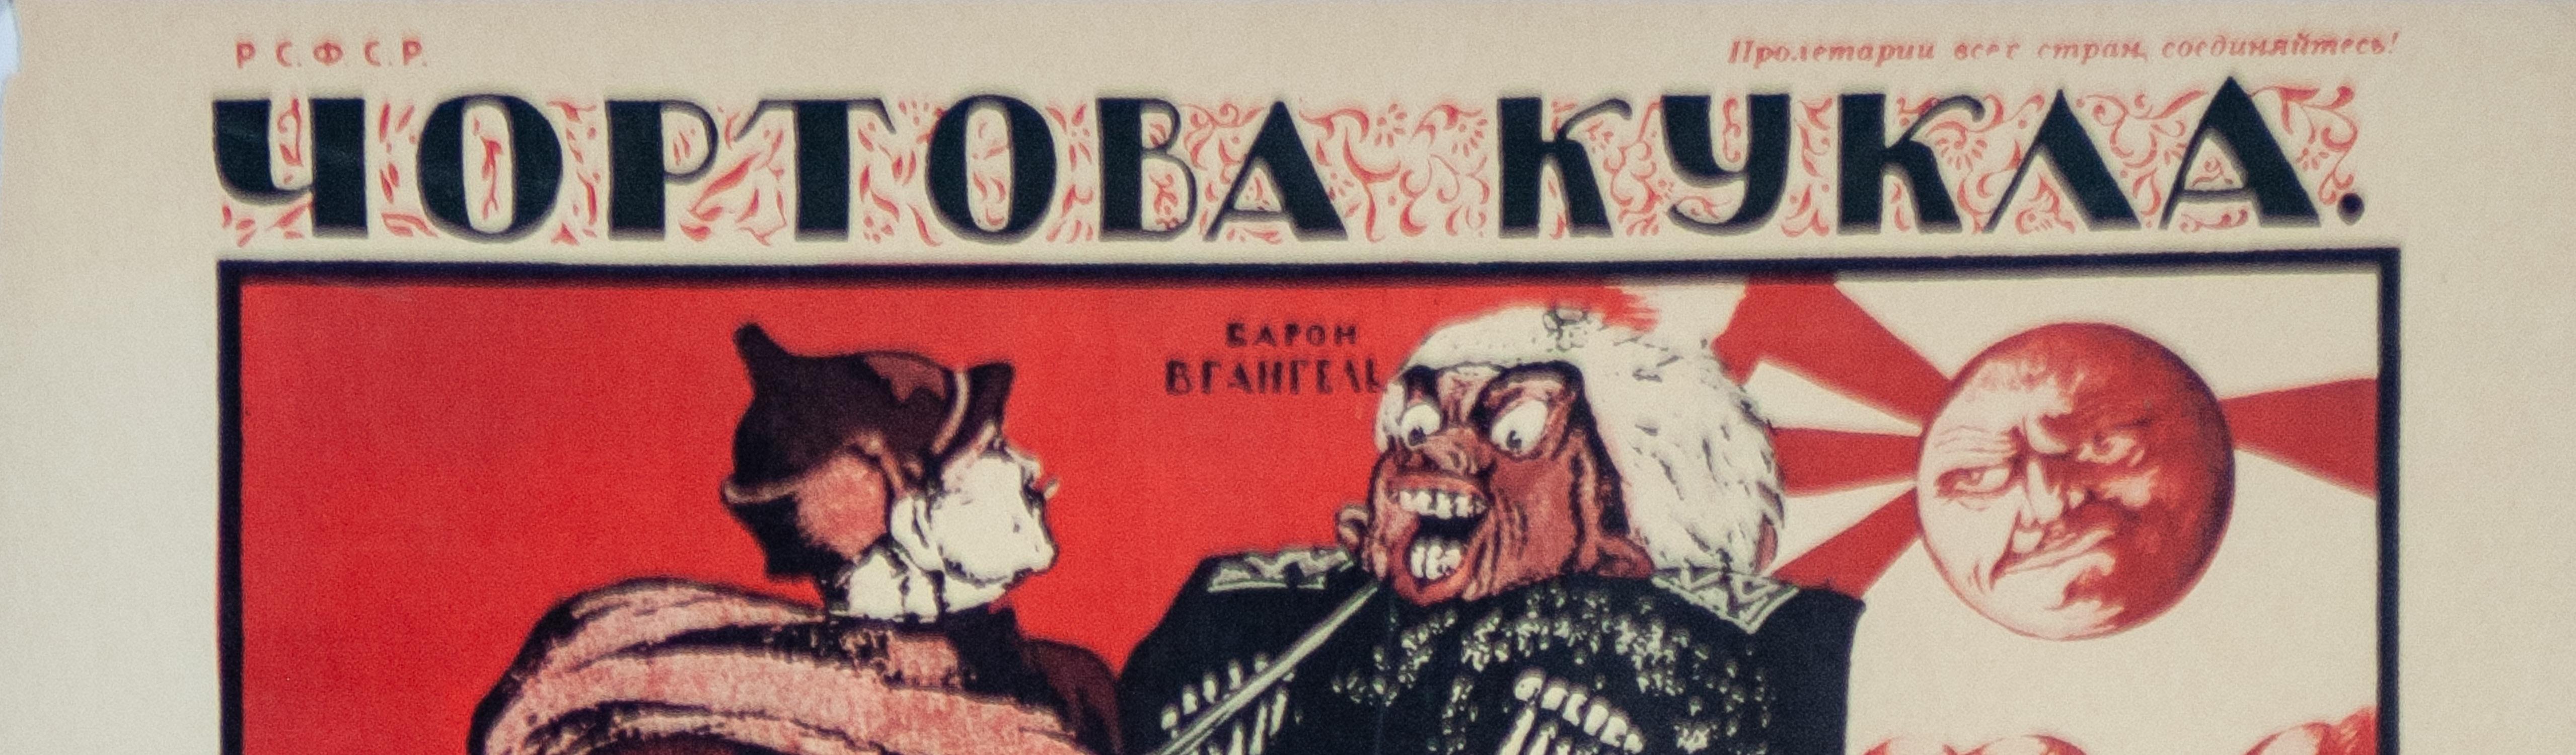 Four 1920's Russian Propaganda Posters  by Alexander Apsit, Dmitri Moor & others For Sale 10